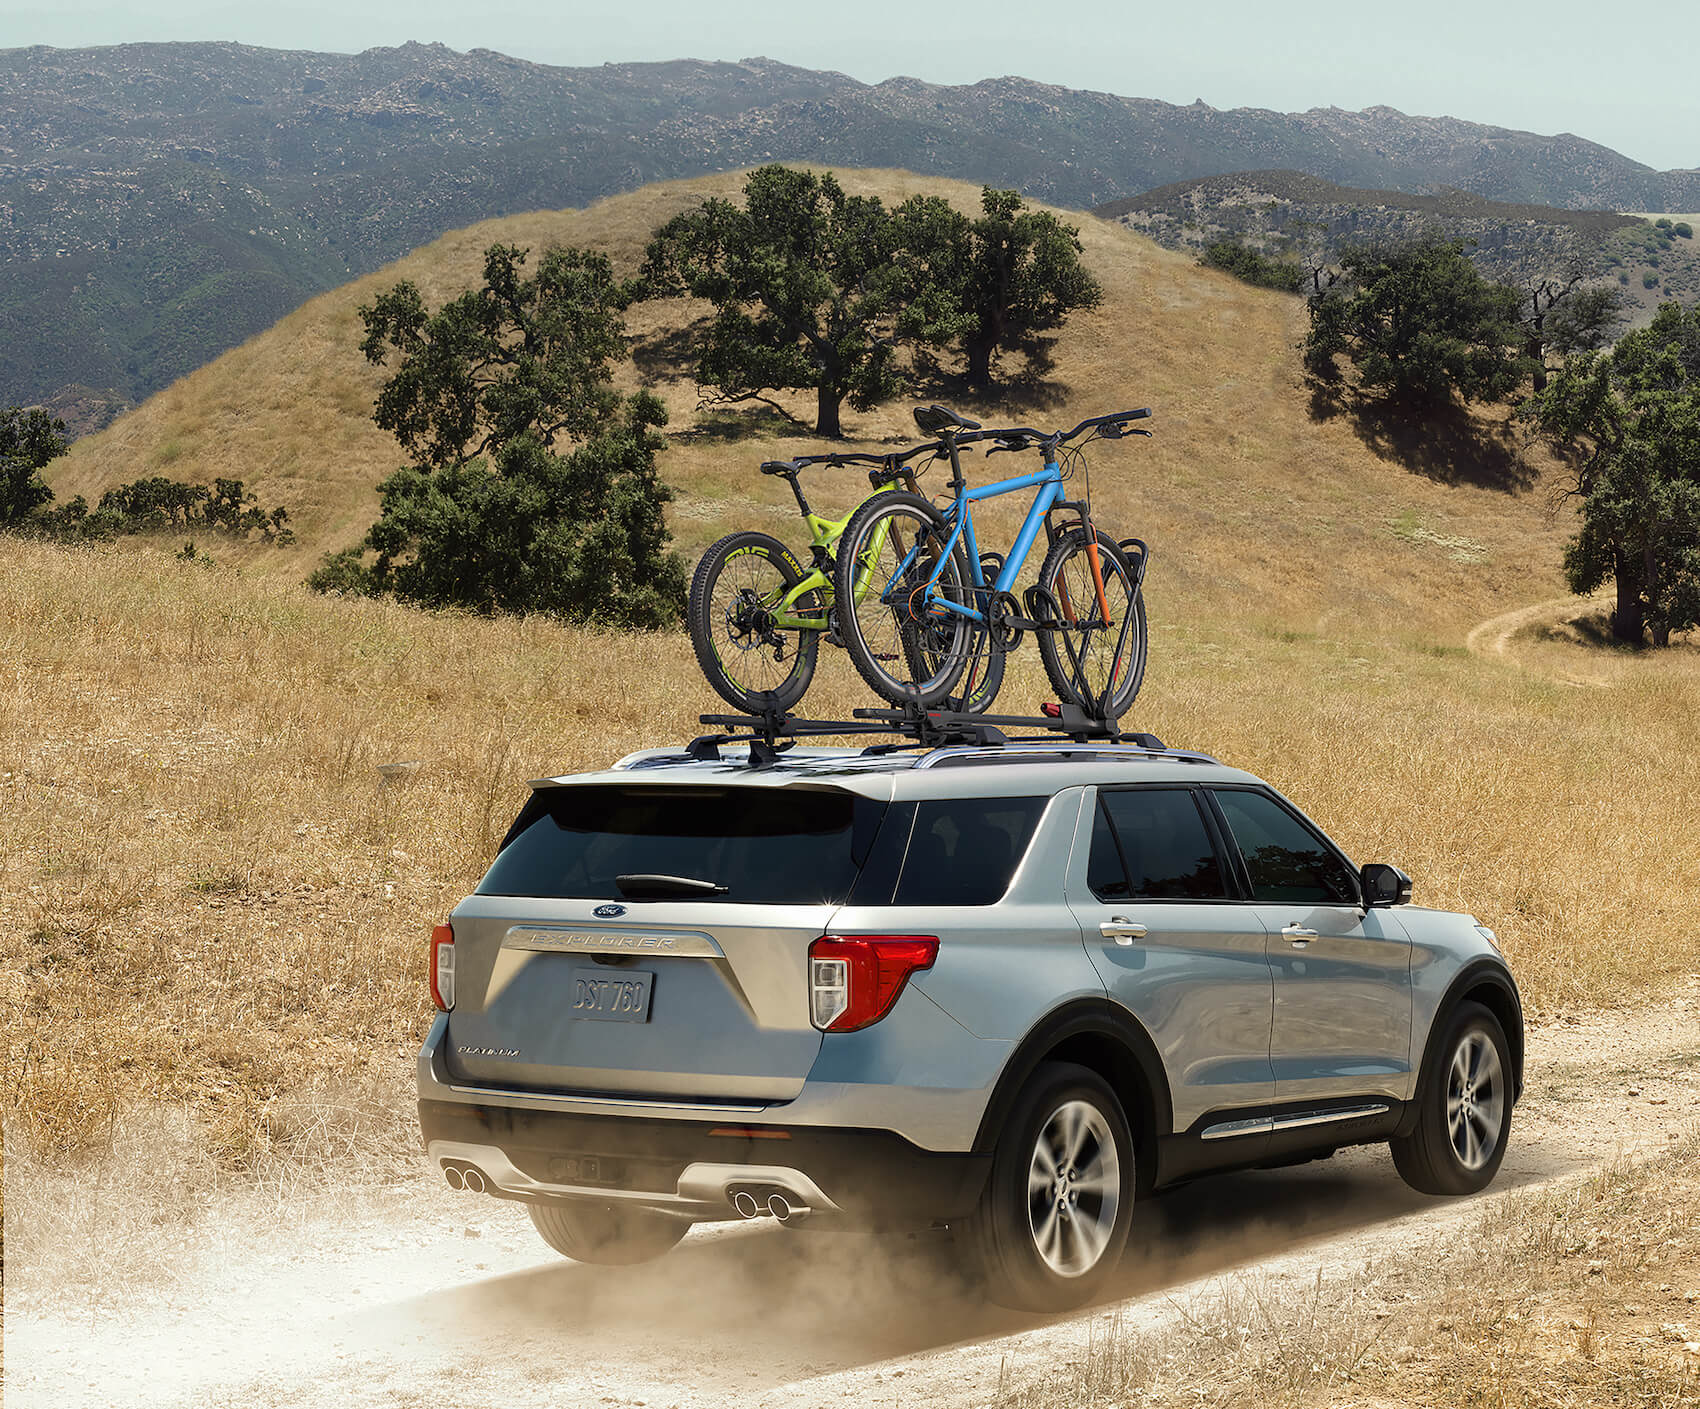 2021 Ford Explorer towing features